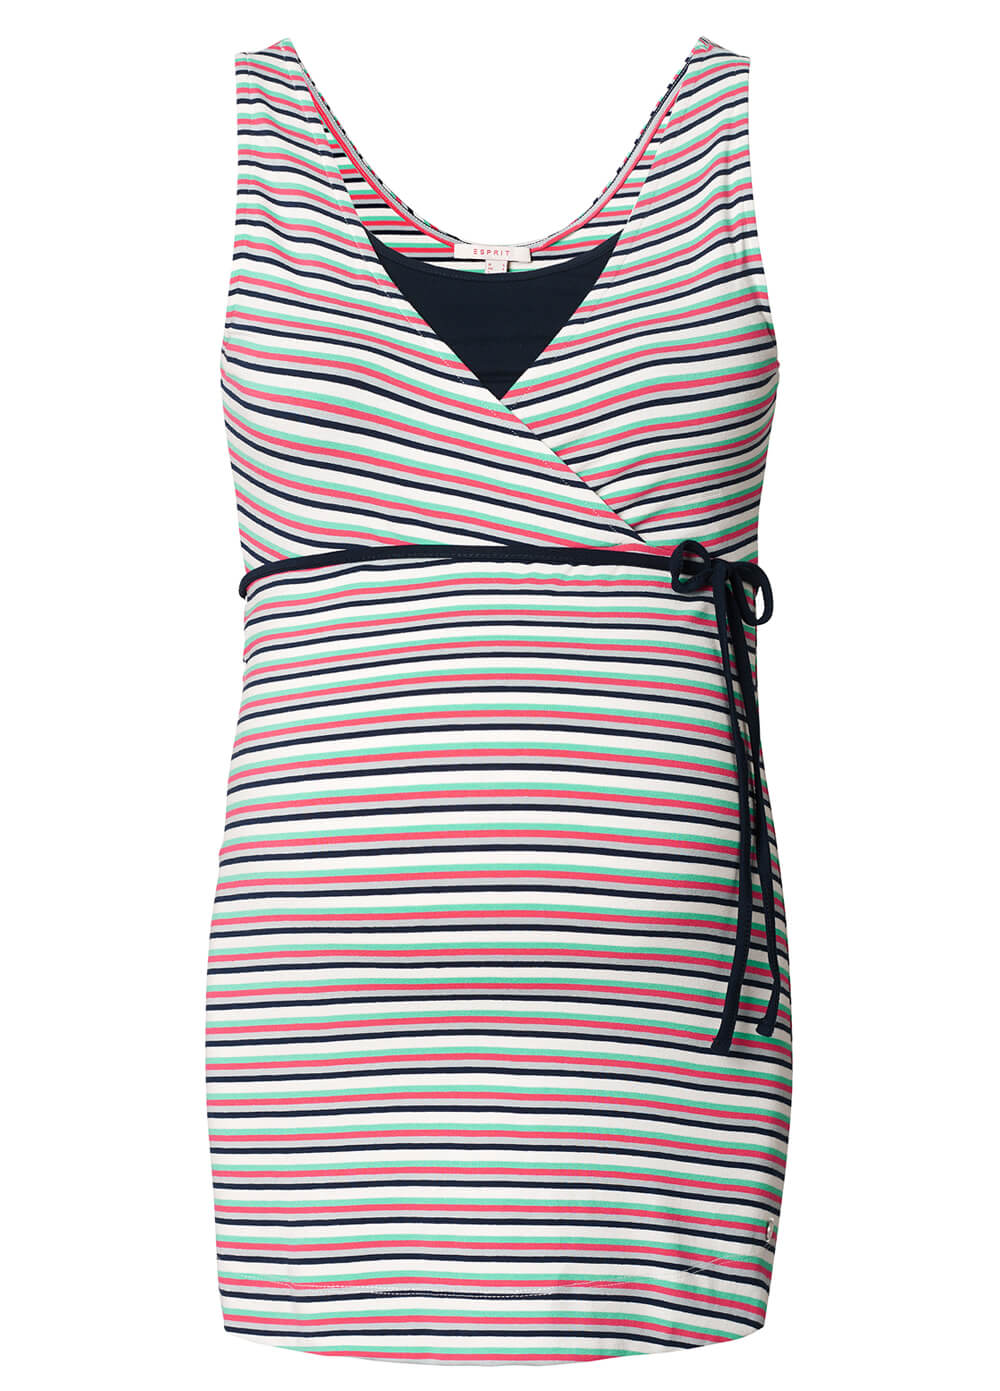 Festive Maternity Nursing Top in Red Stripes by Esprit